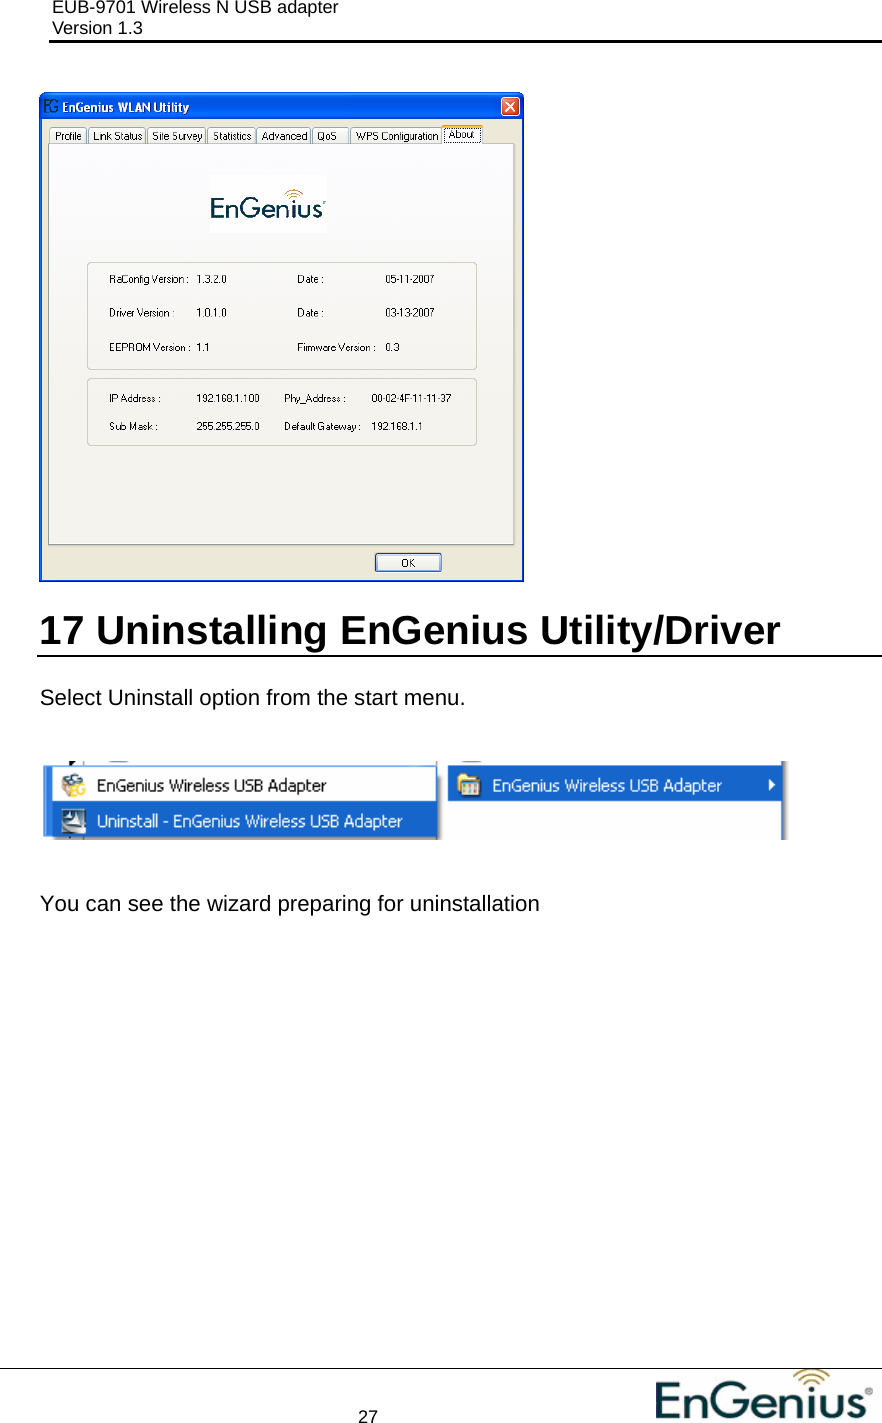 EUB-9701 Wireless N USB adapter                                     Version 1.3    27                                                            17  Uninstalling EnGenius Utility/Driver  Select Uninstall option from the start menu.    You can see the wizard preparing for uninstallation 